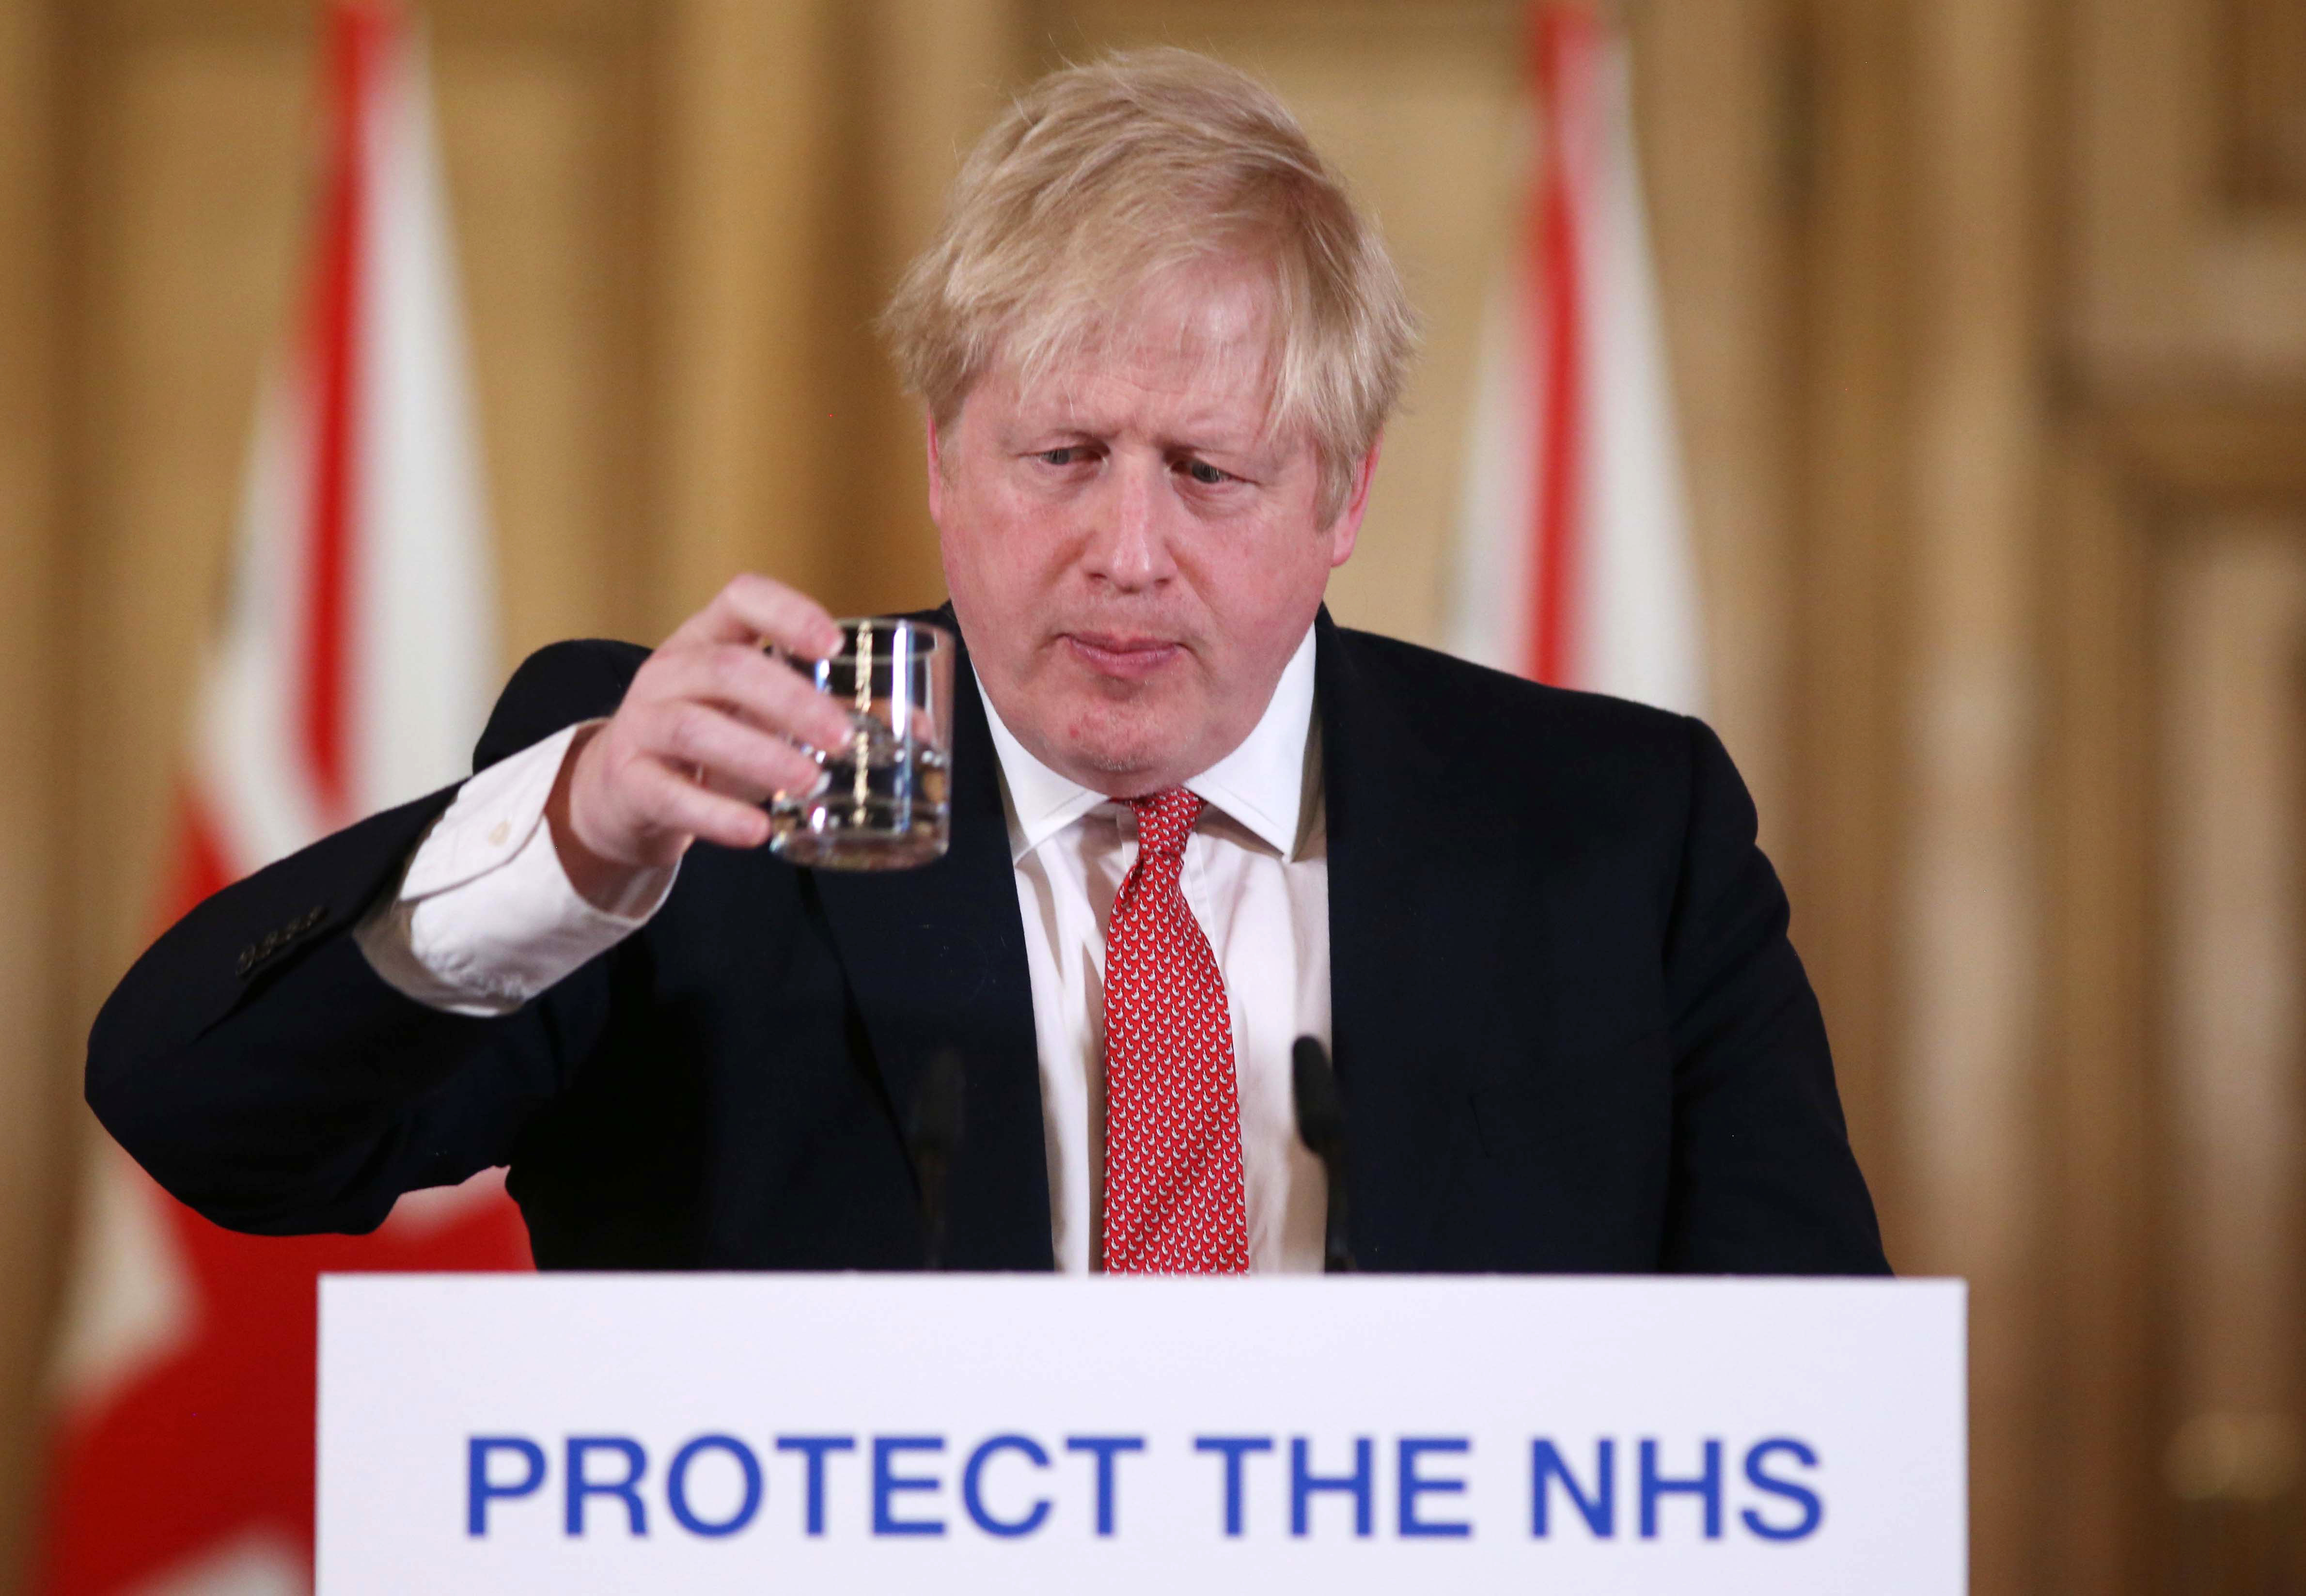 Britain's Prime Minister Boris Johnson takes a drink of water during a news conference to give a daily update on the government's response to the novel coronavirus COVID-19 outbreak, inside 10 Downing Street in London on March 22, 2020. (IAN VOGLER/POOL/AFP via Getty Images)